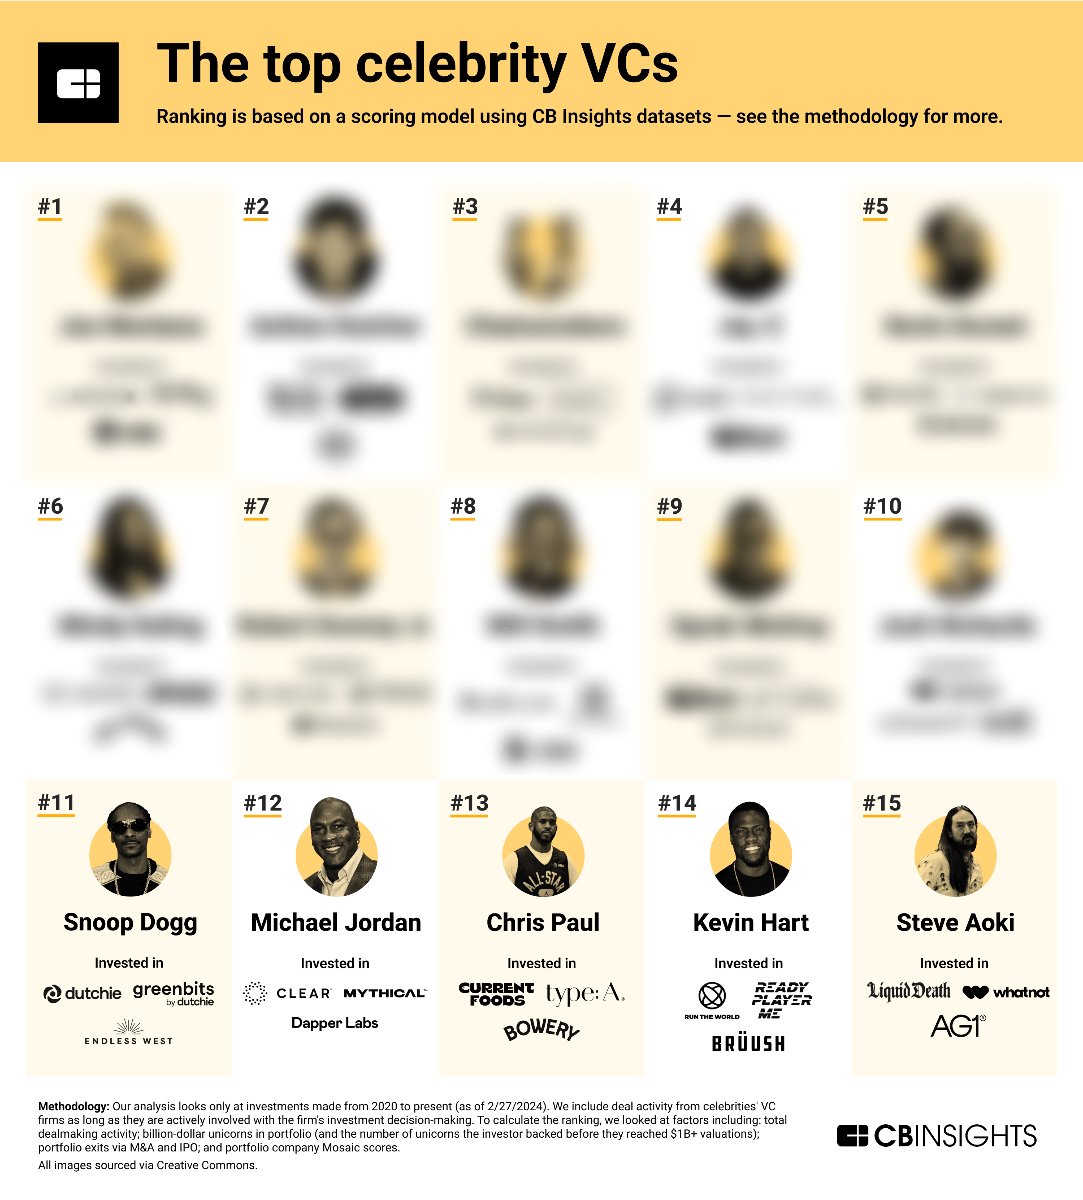 The top celeb-turned-investor on this list has done 569 deals and seen 21 exits since 2020. Can you guess who they are? Here's a hint: They led the San Francisco 49ers to 4 Super Bowl victories. Find out if you’re right by downloading the full report. cbi.team/3xZ98Pa